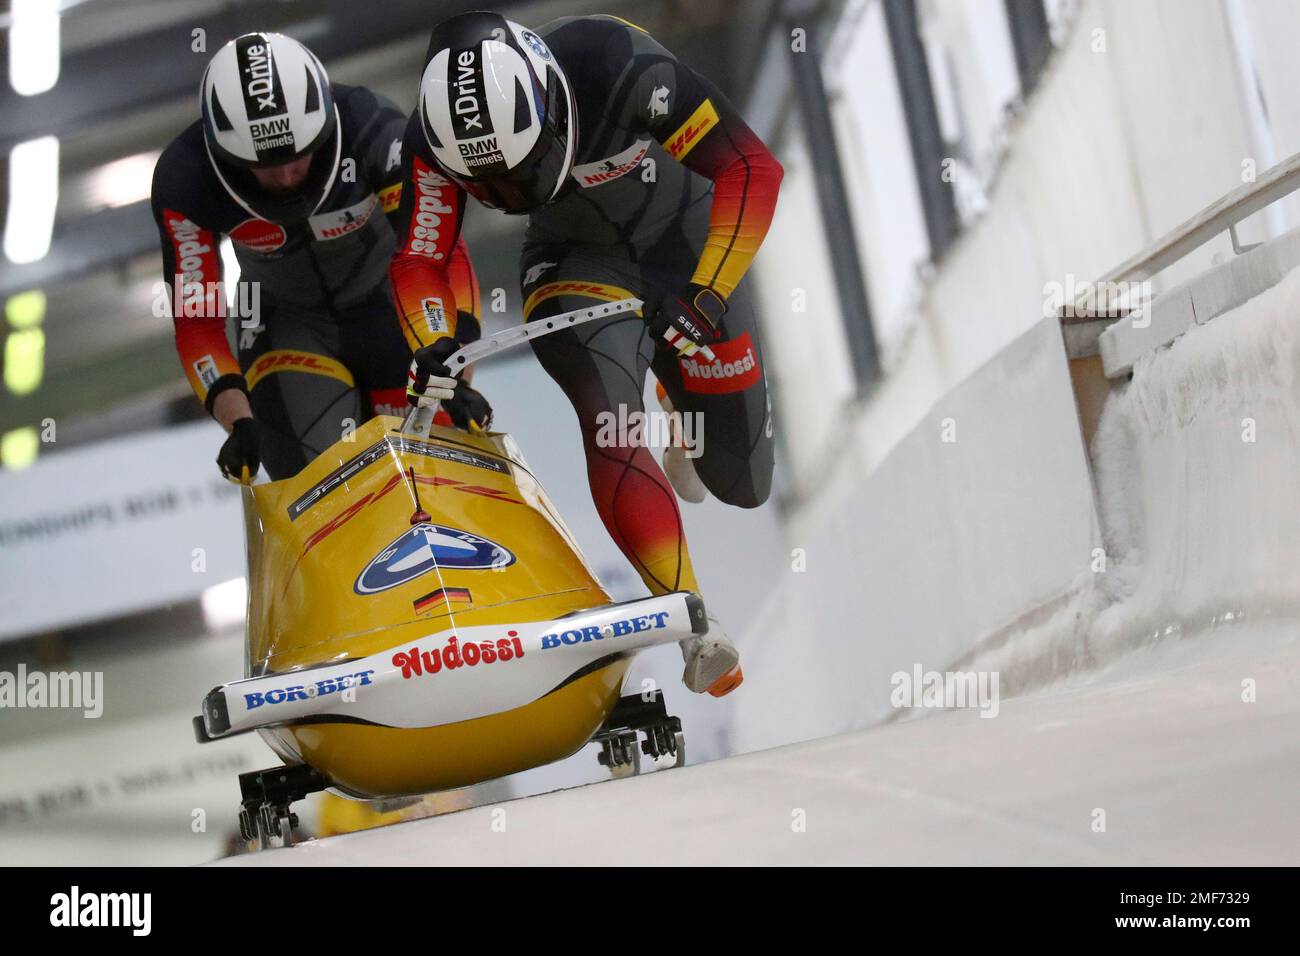 Hans Peter Hannighofer and Christian Roeder start during the two mens bobsleigh race at the Bobsleigh and Skeleton World Championships in Altenberg, Germany, Saturday, Feb